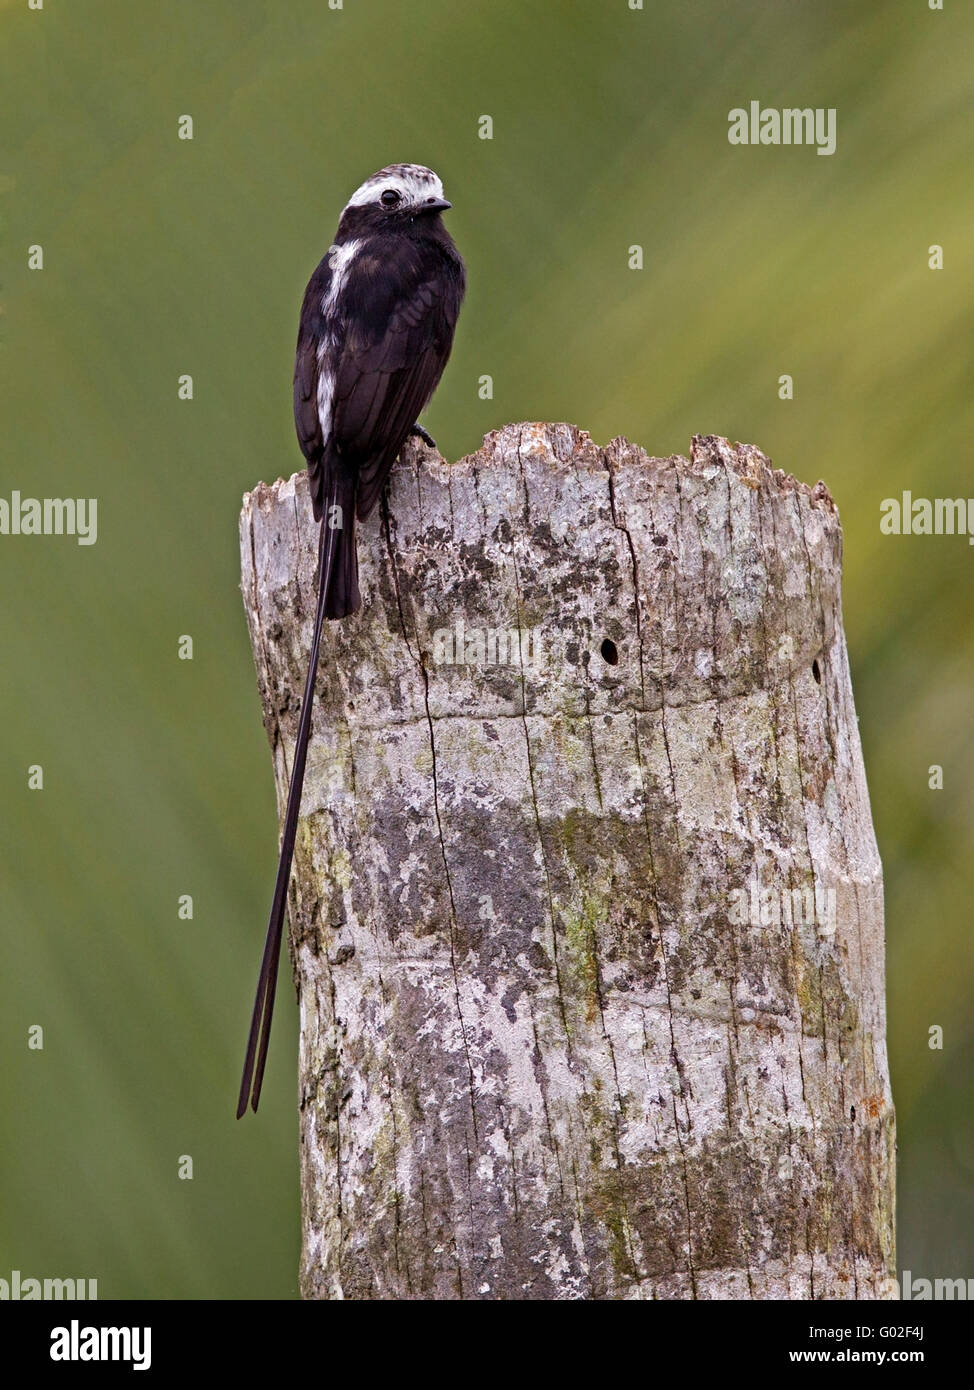 Male long-tailed tyrant perched on tree stump Stock Photo